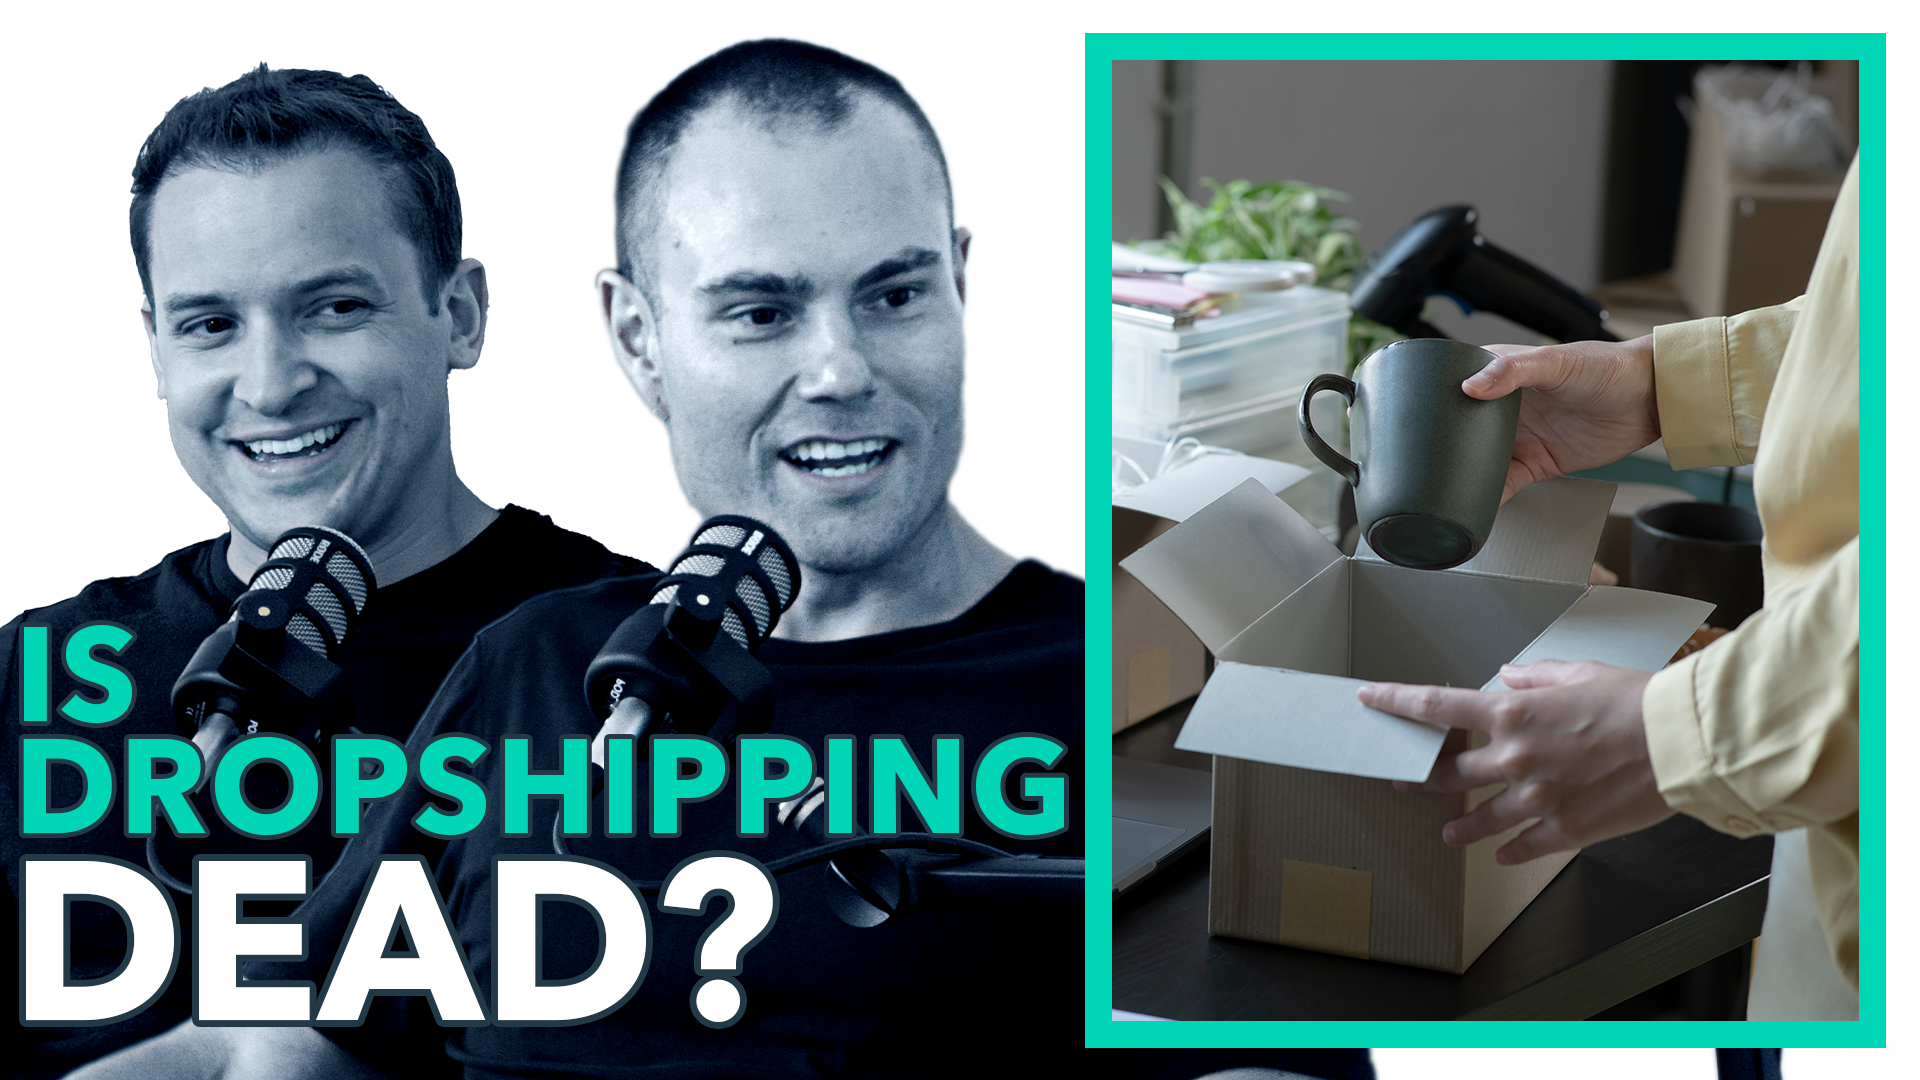 Is dropshipping dead?